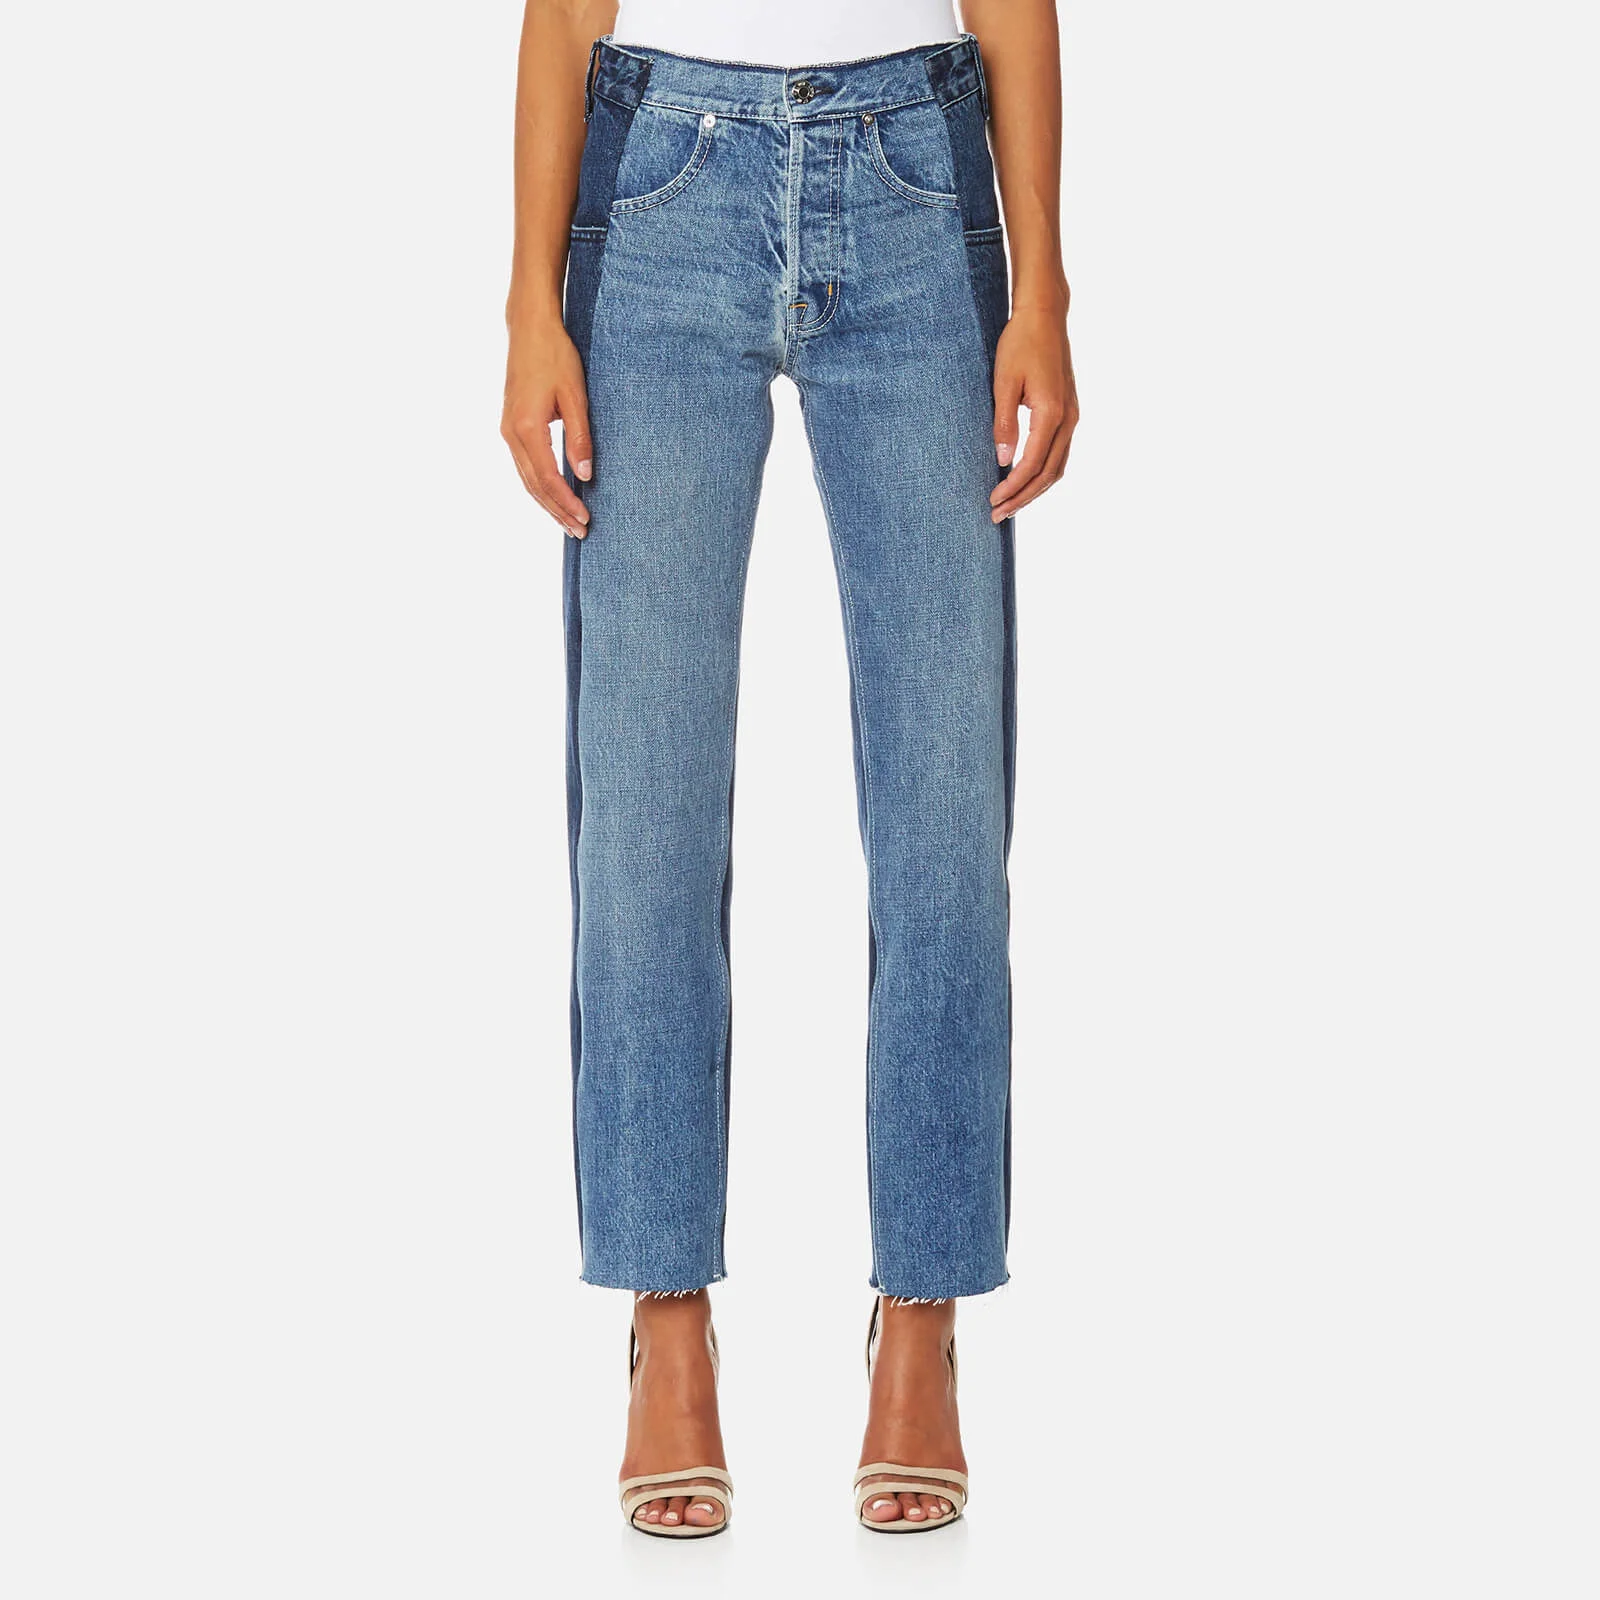 Helmut Lang Women's Reconstructed Straight Jeans - Light Blue Mix Image 1